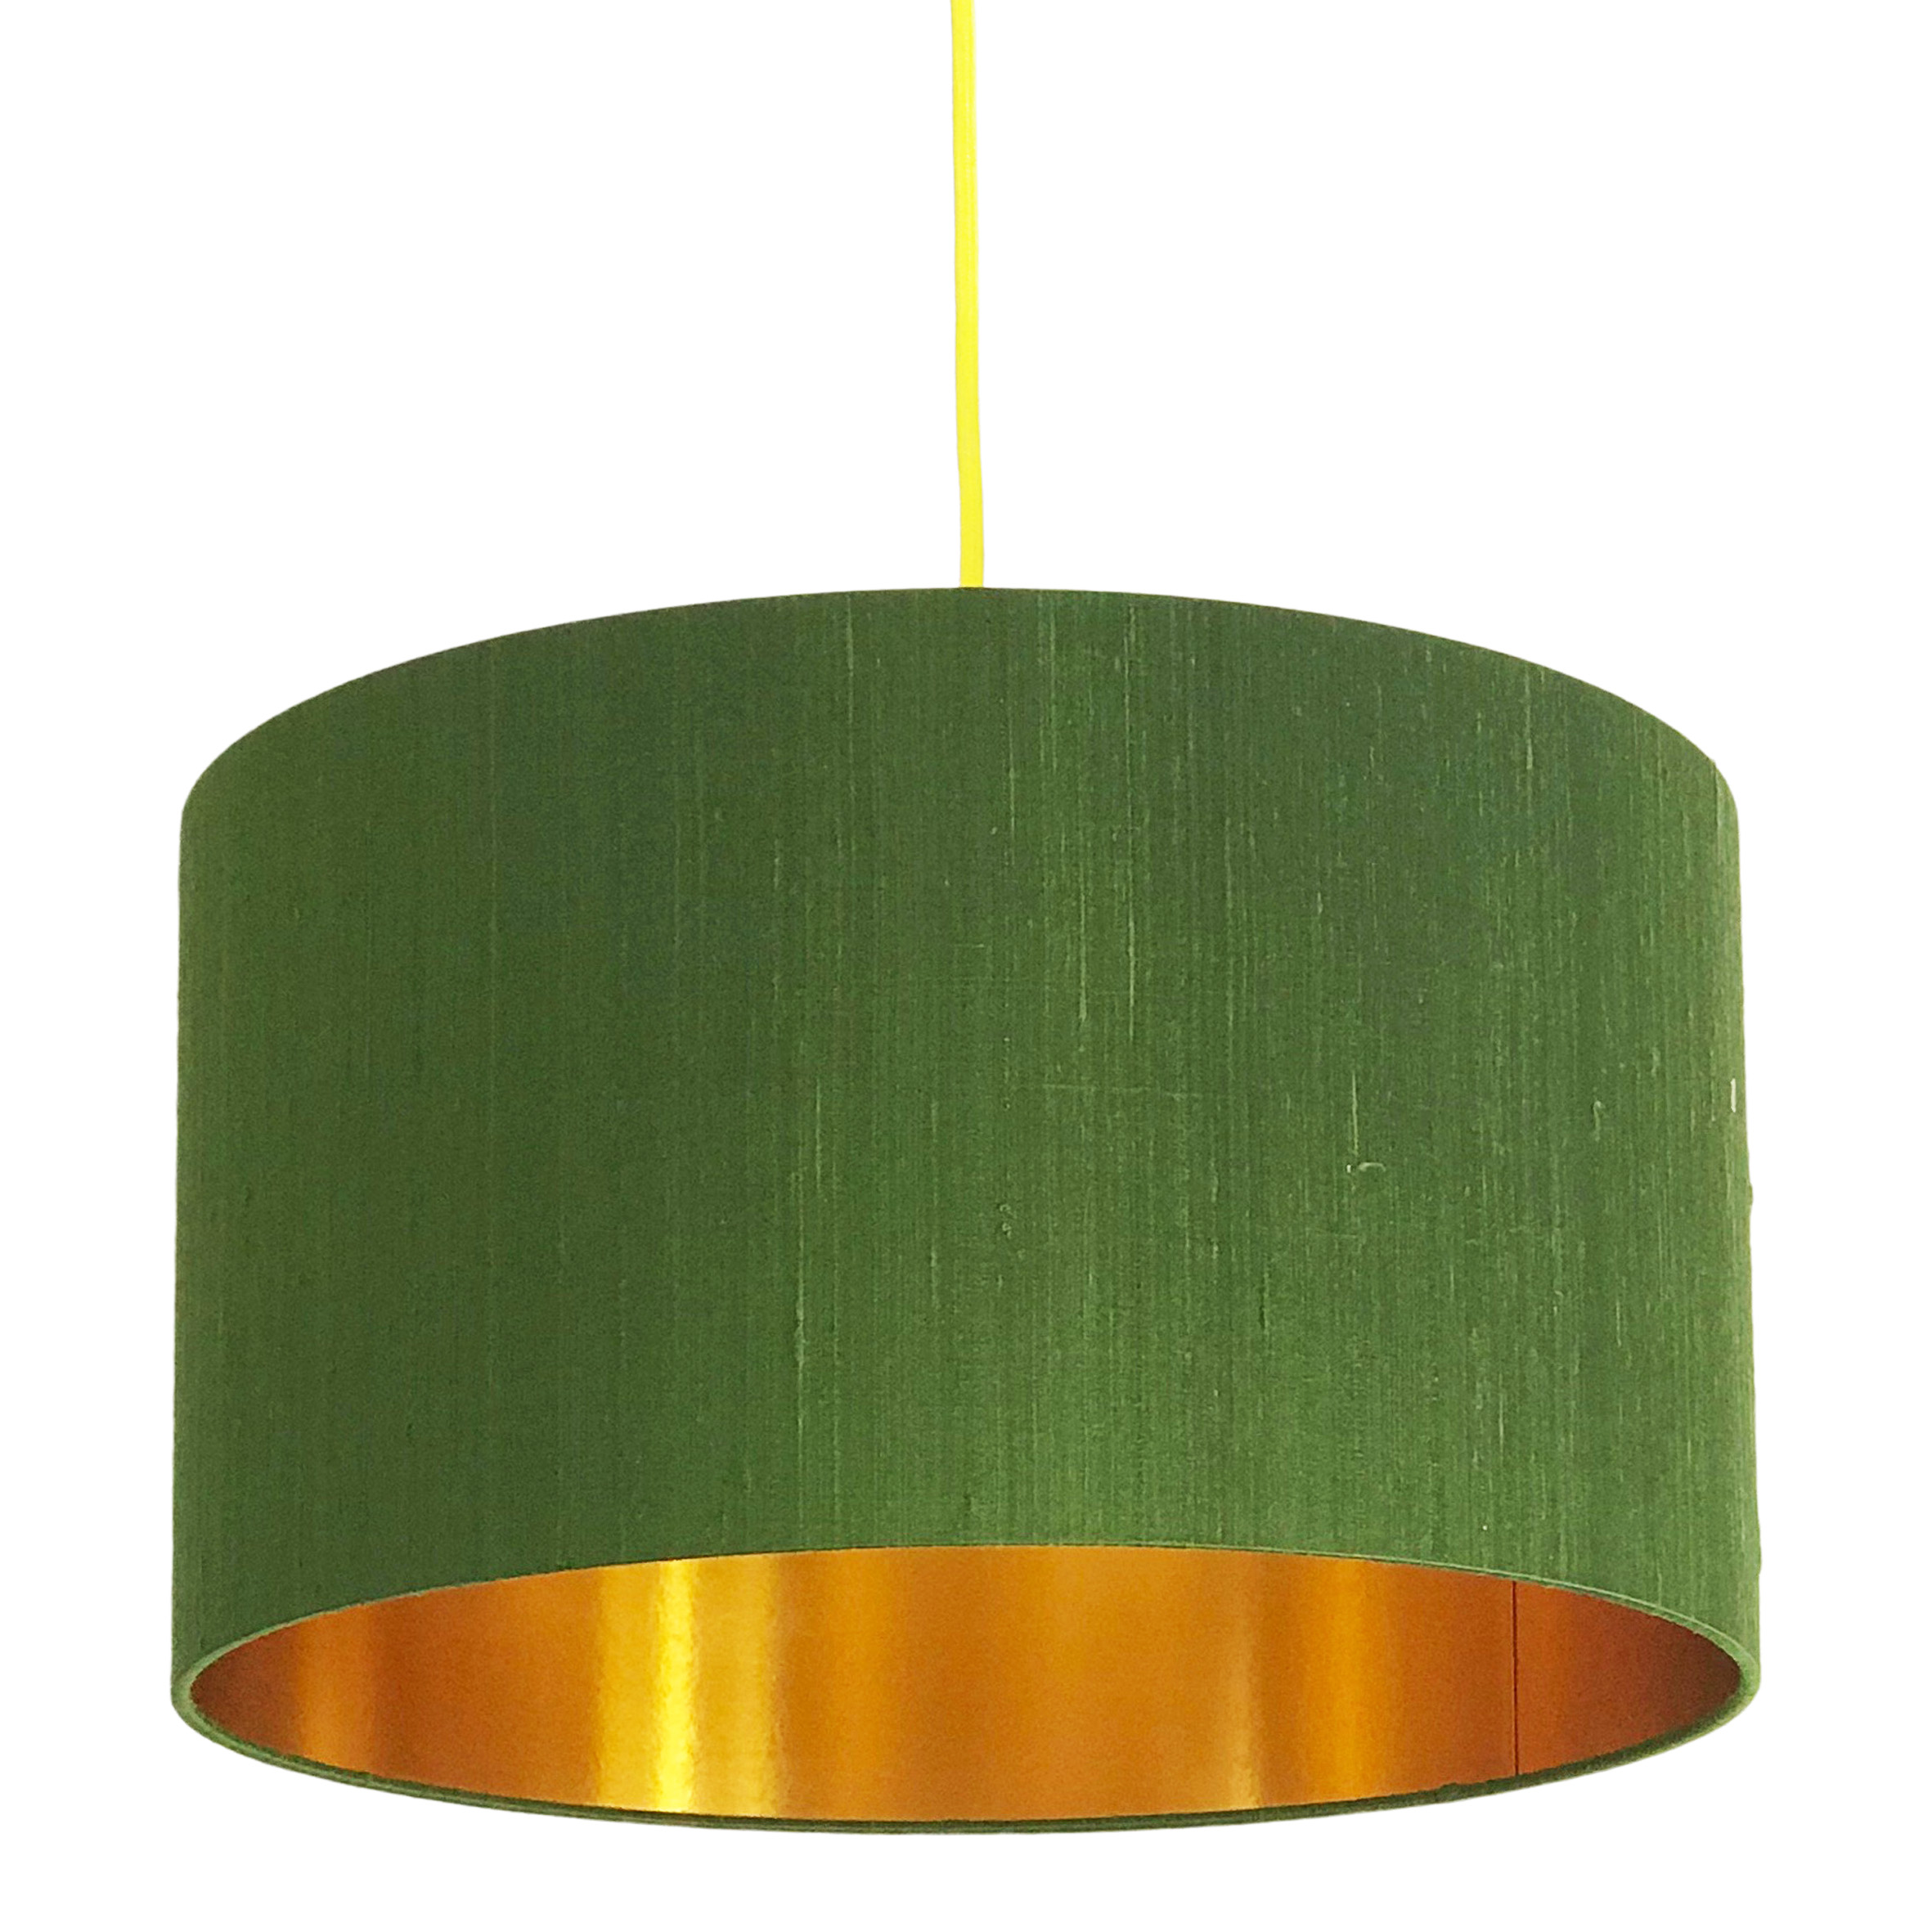 Moss Silk Lampshade With Metallic Gold, How To Replace Lampshade Lining